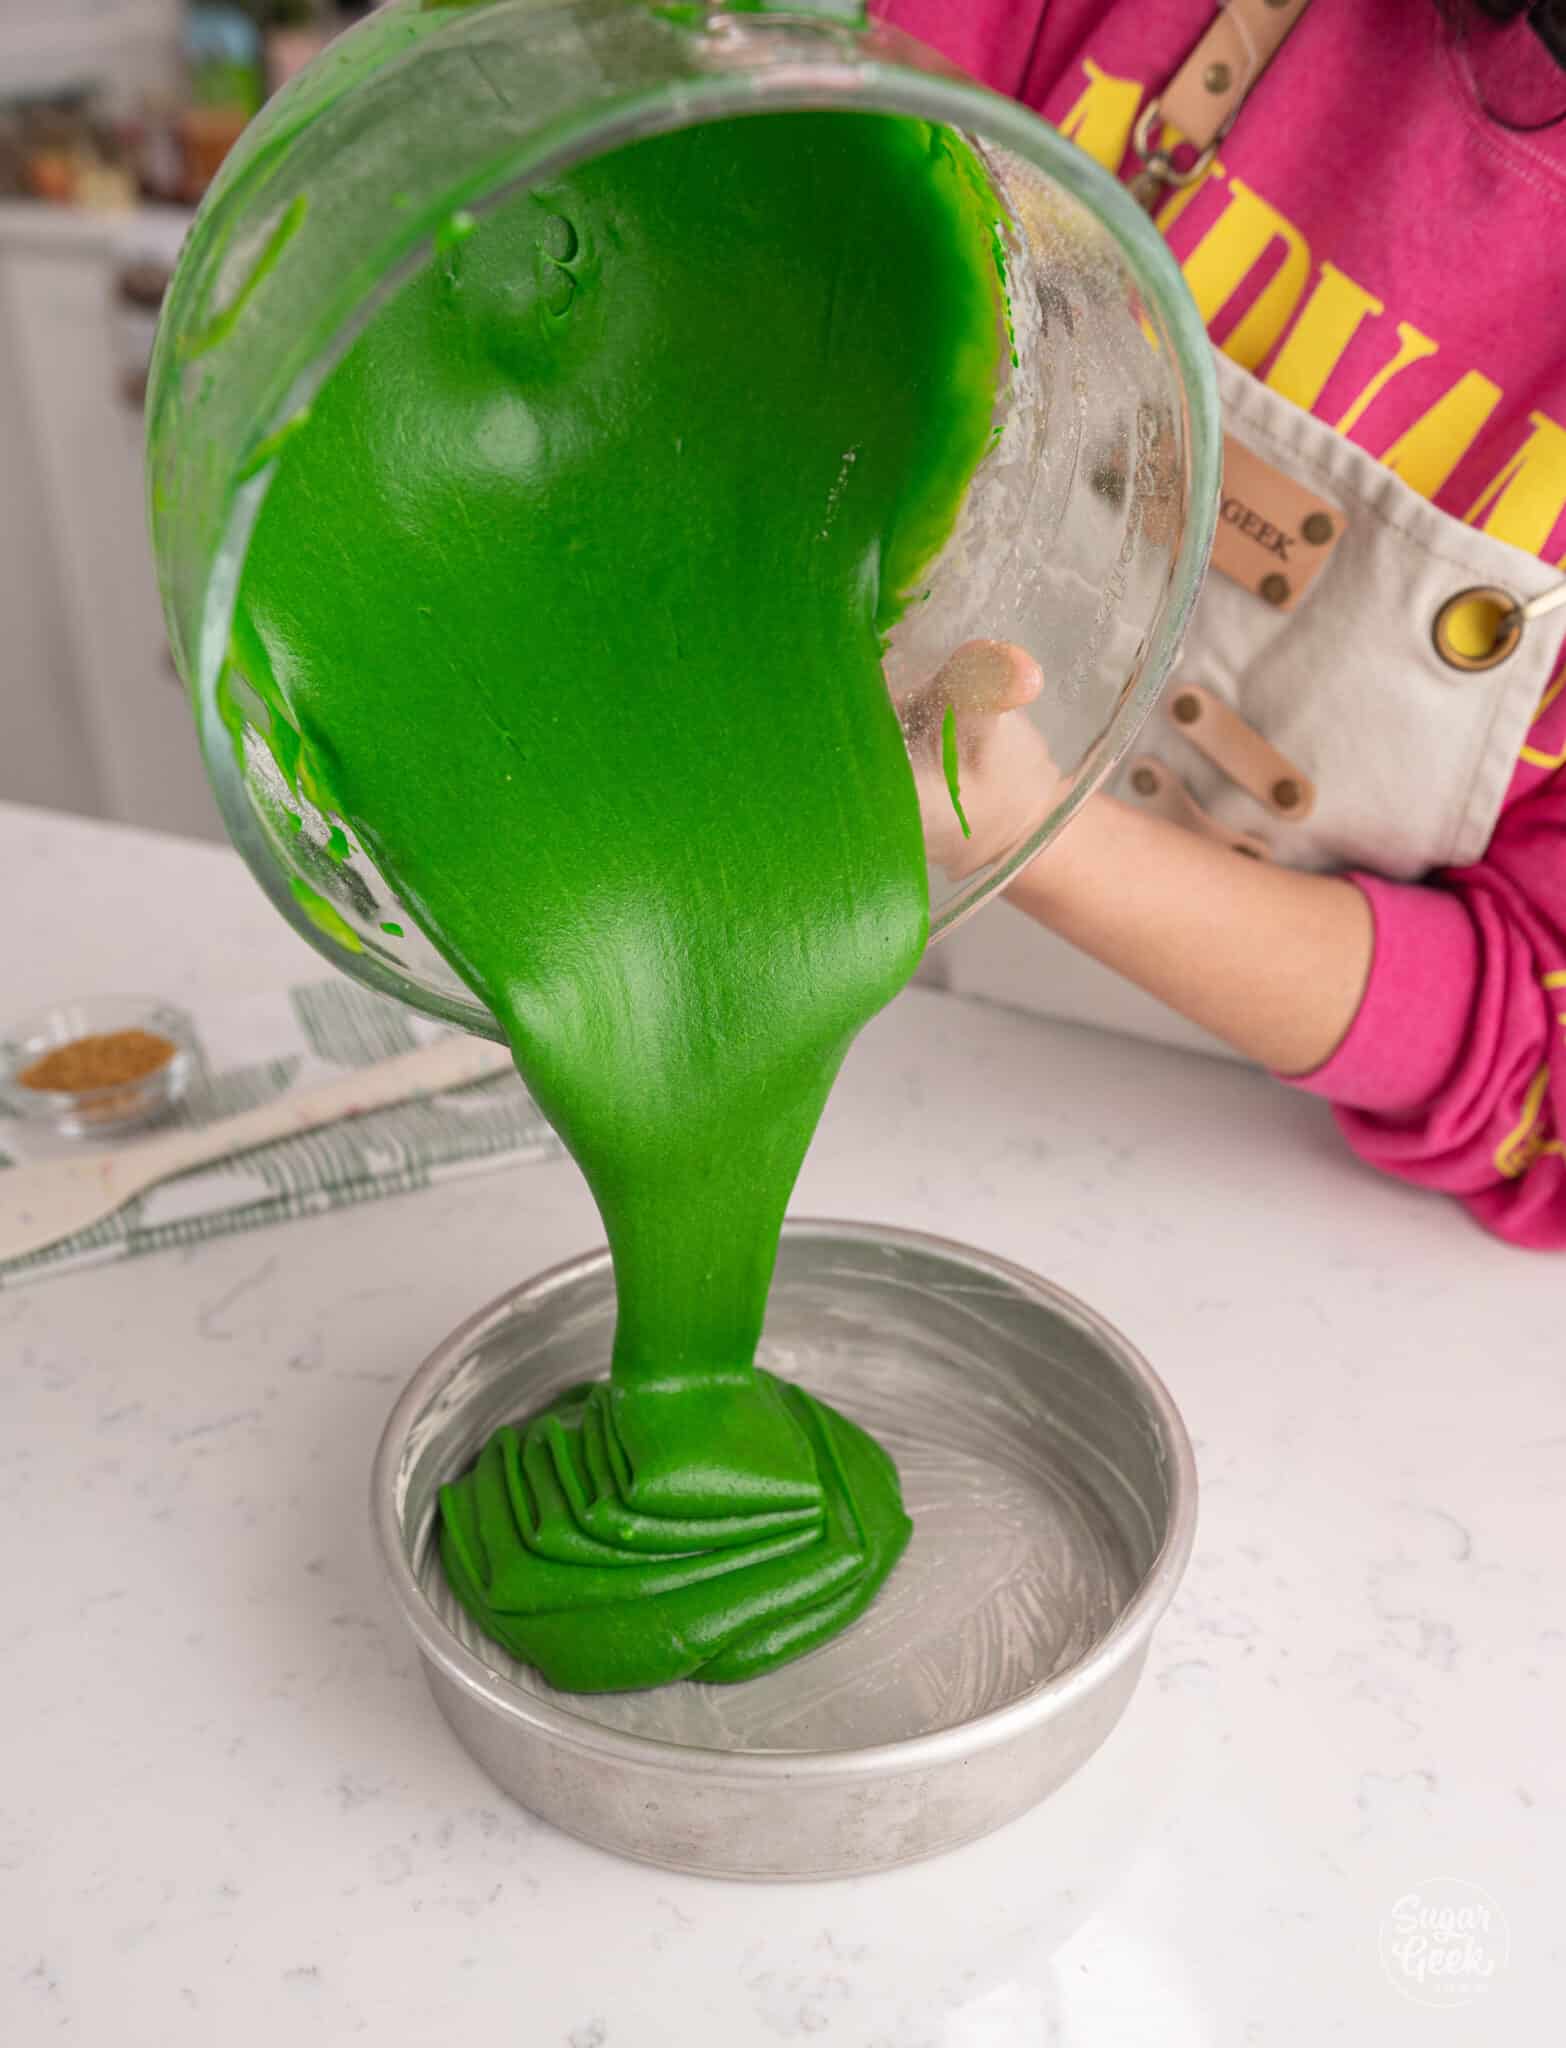 hands pouring green cake batter from a glass bowl into cake pans